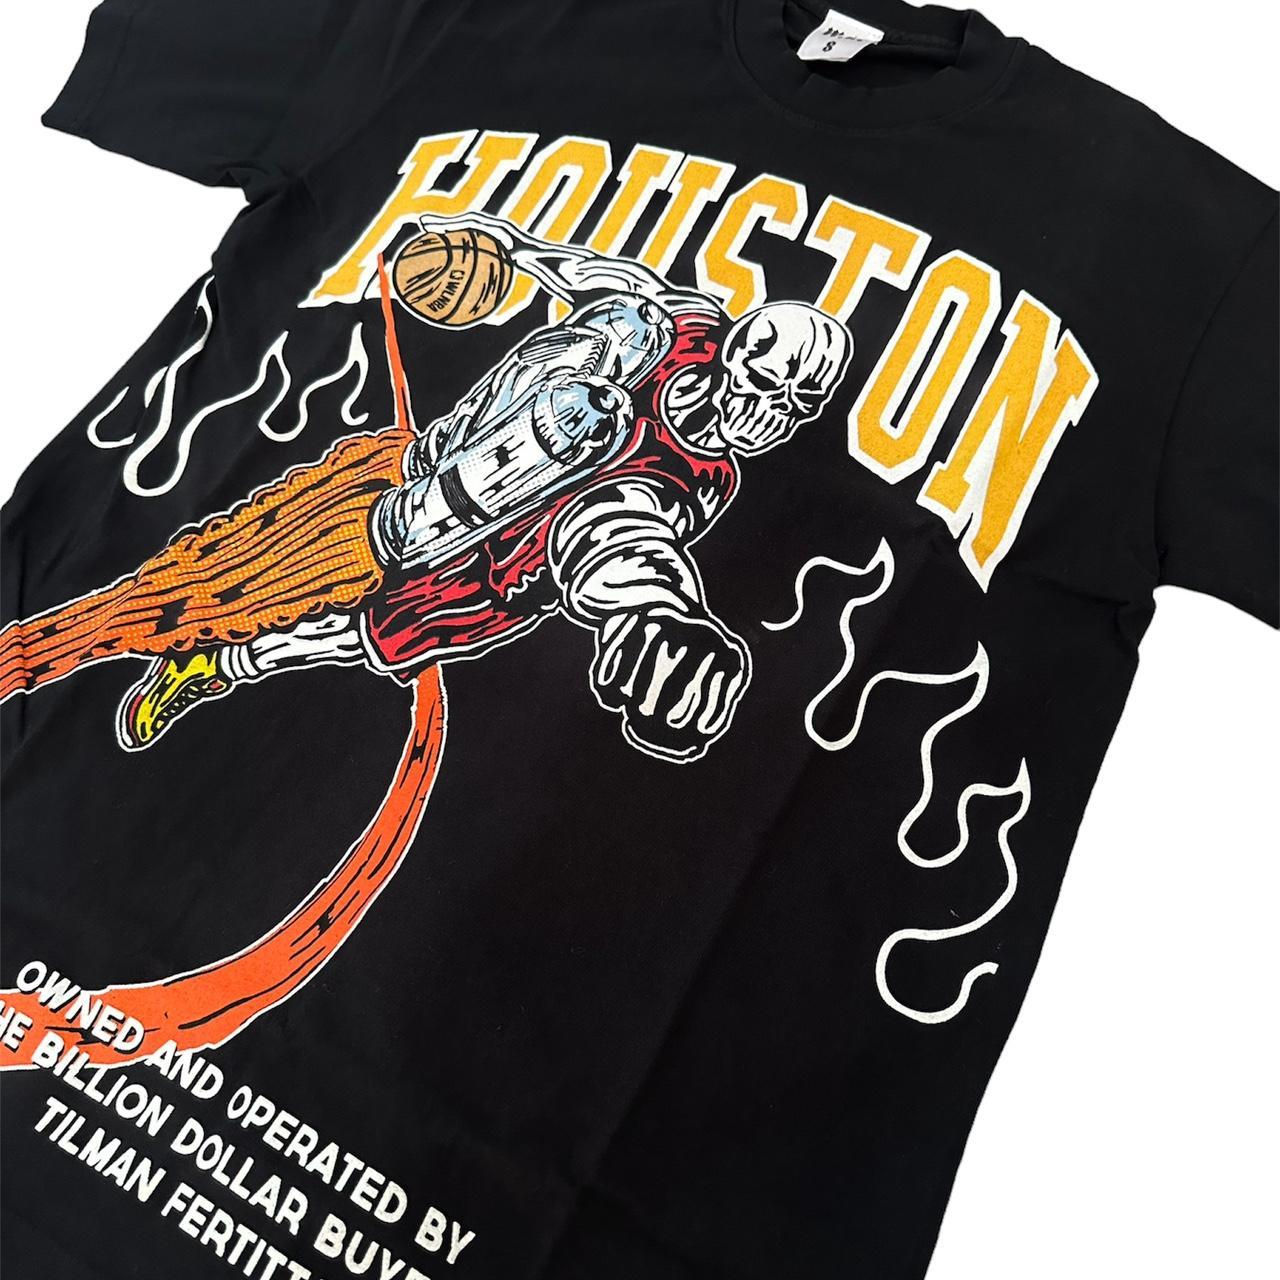 How Bout Them Stros – Graphic Tee – Davies Entertainment